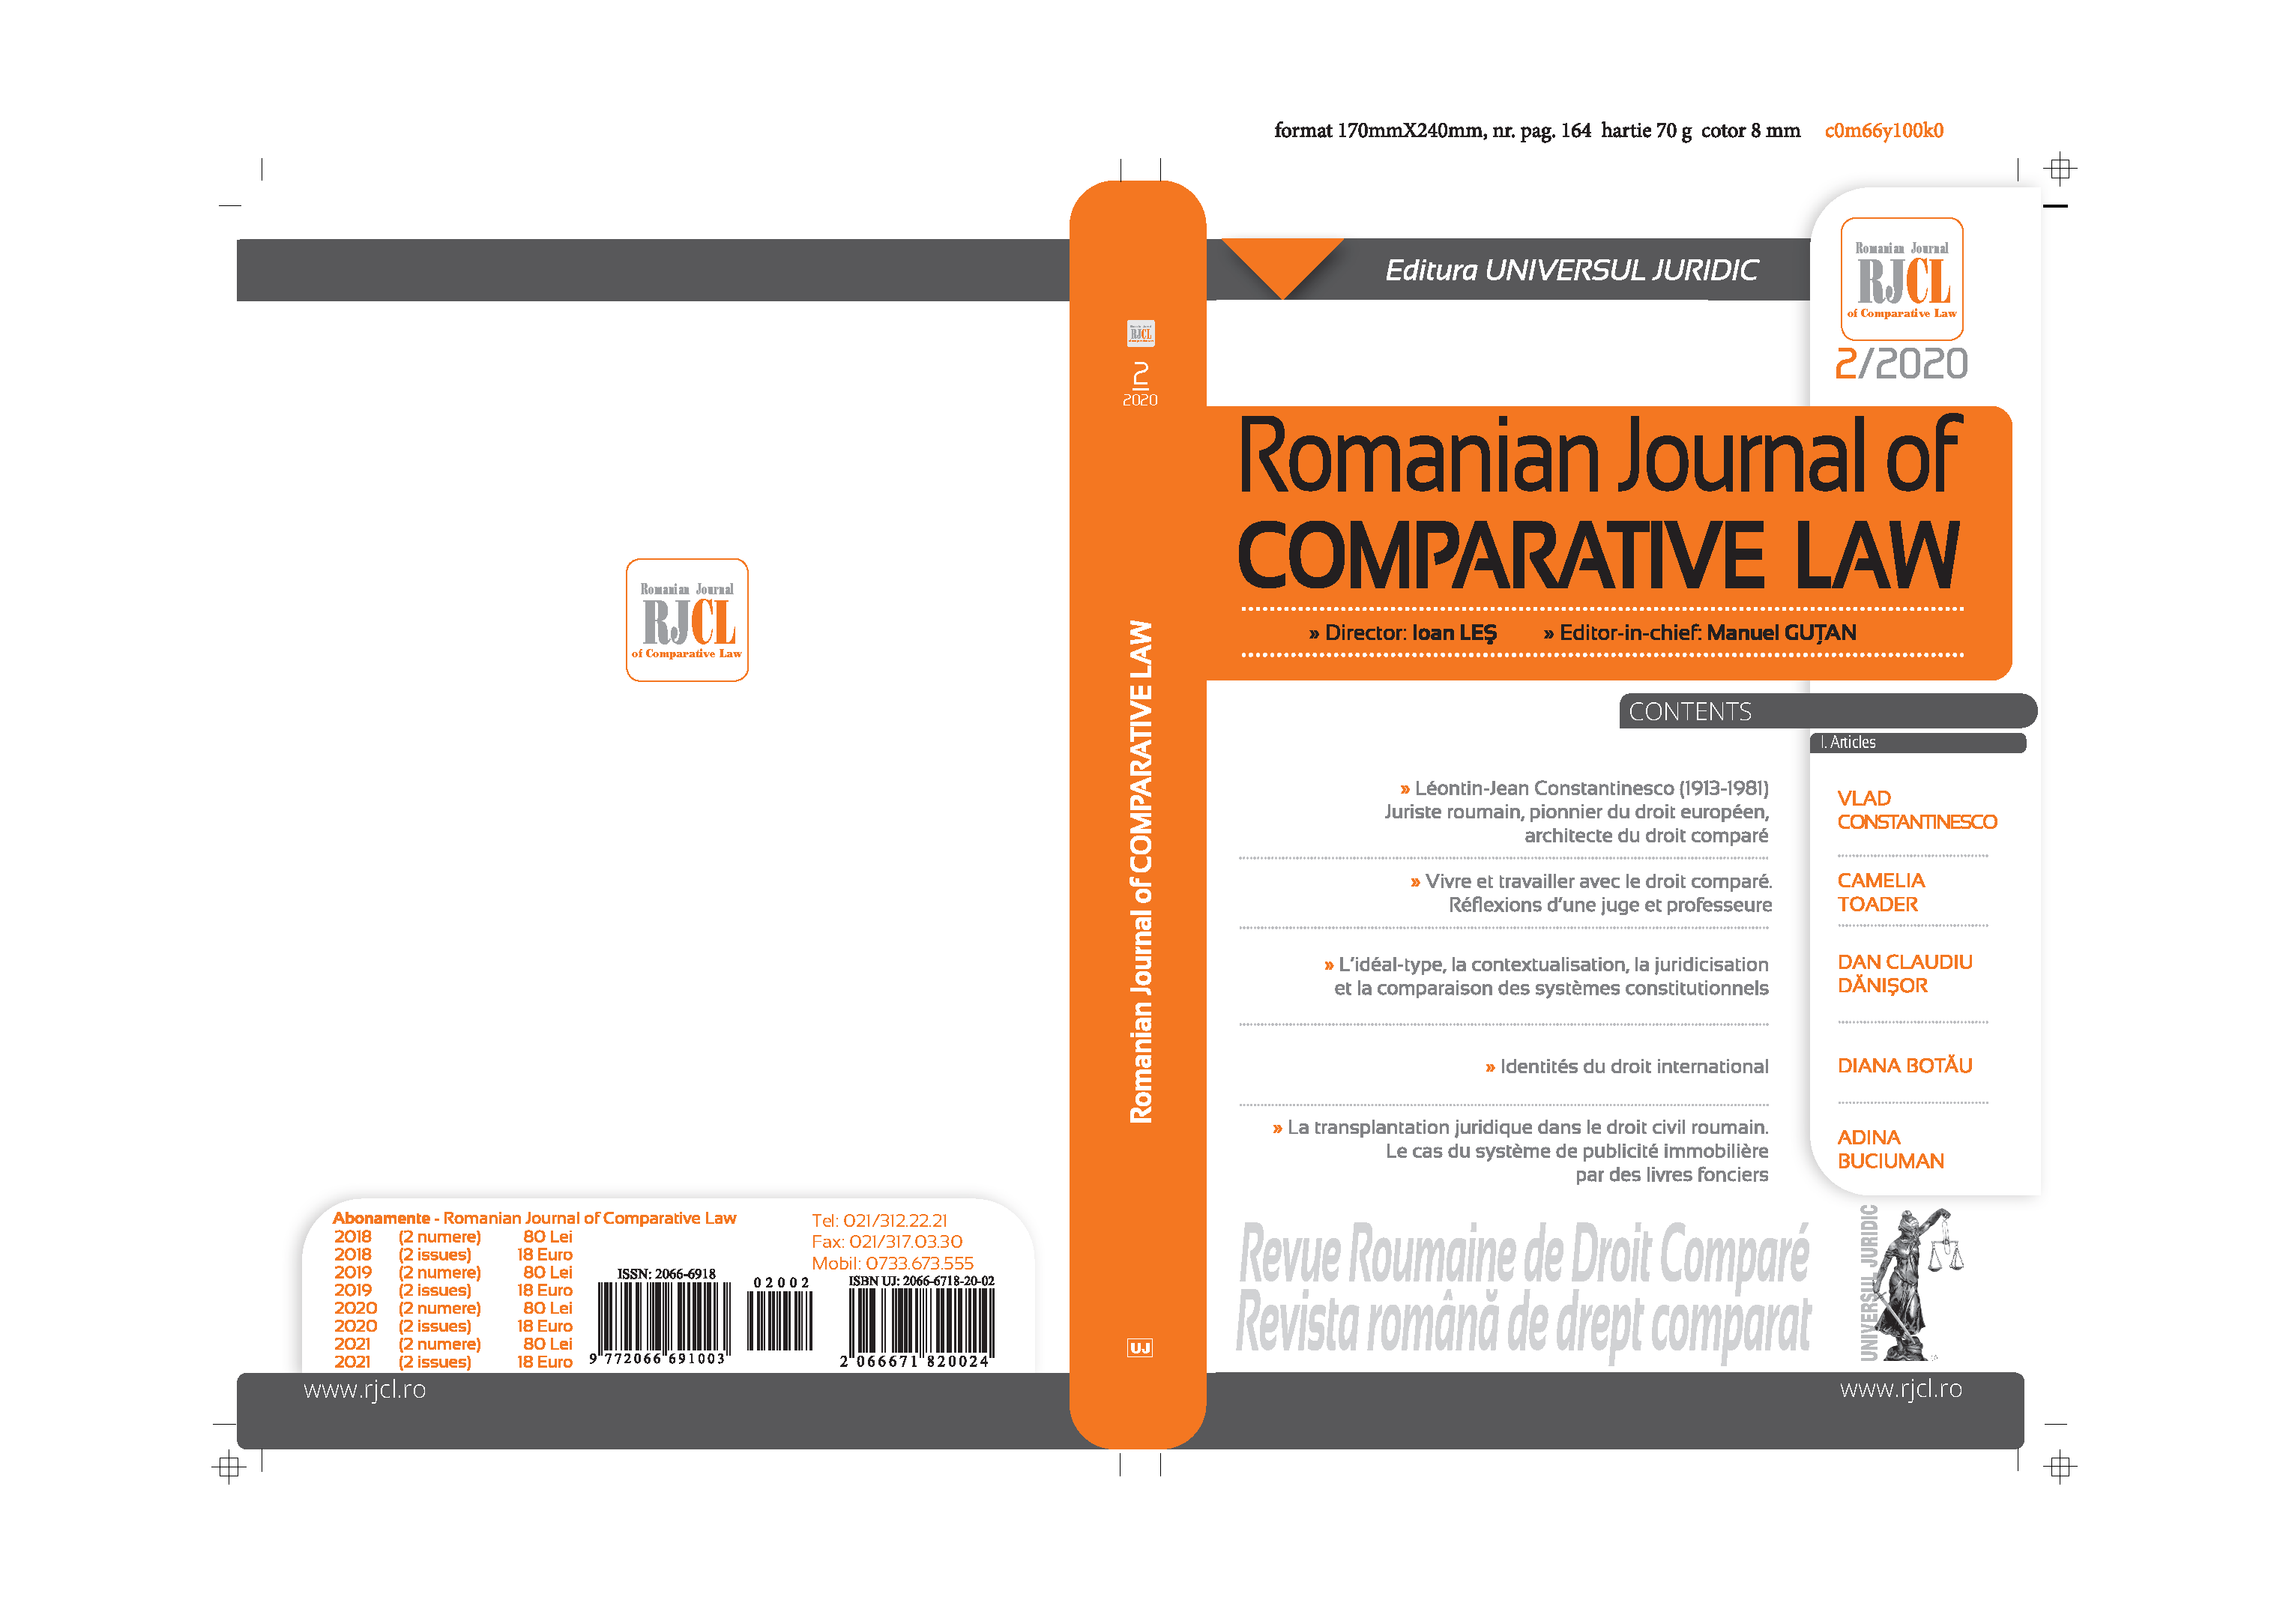 The ideal type, contextualization, legalization and comparison of constitutional systems Cover Image